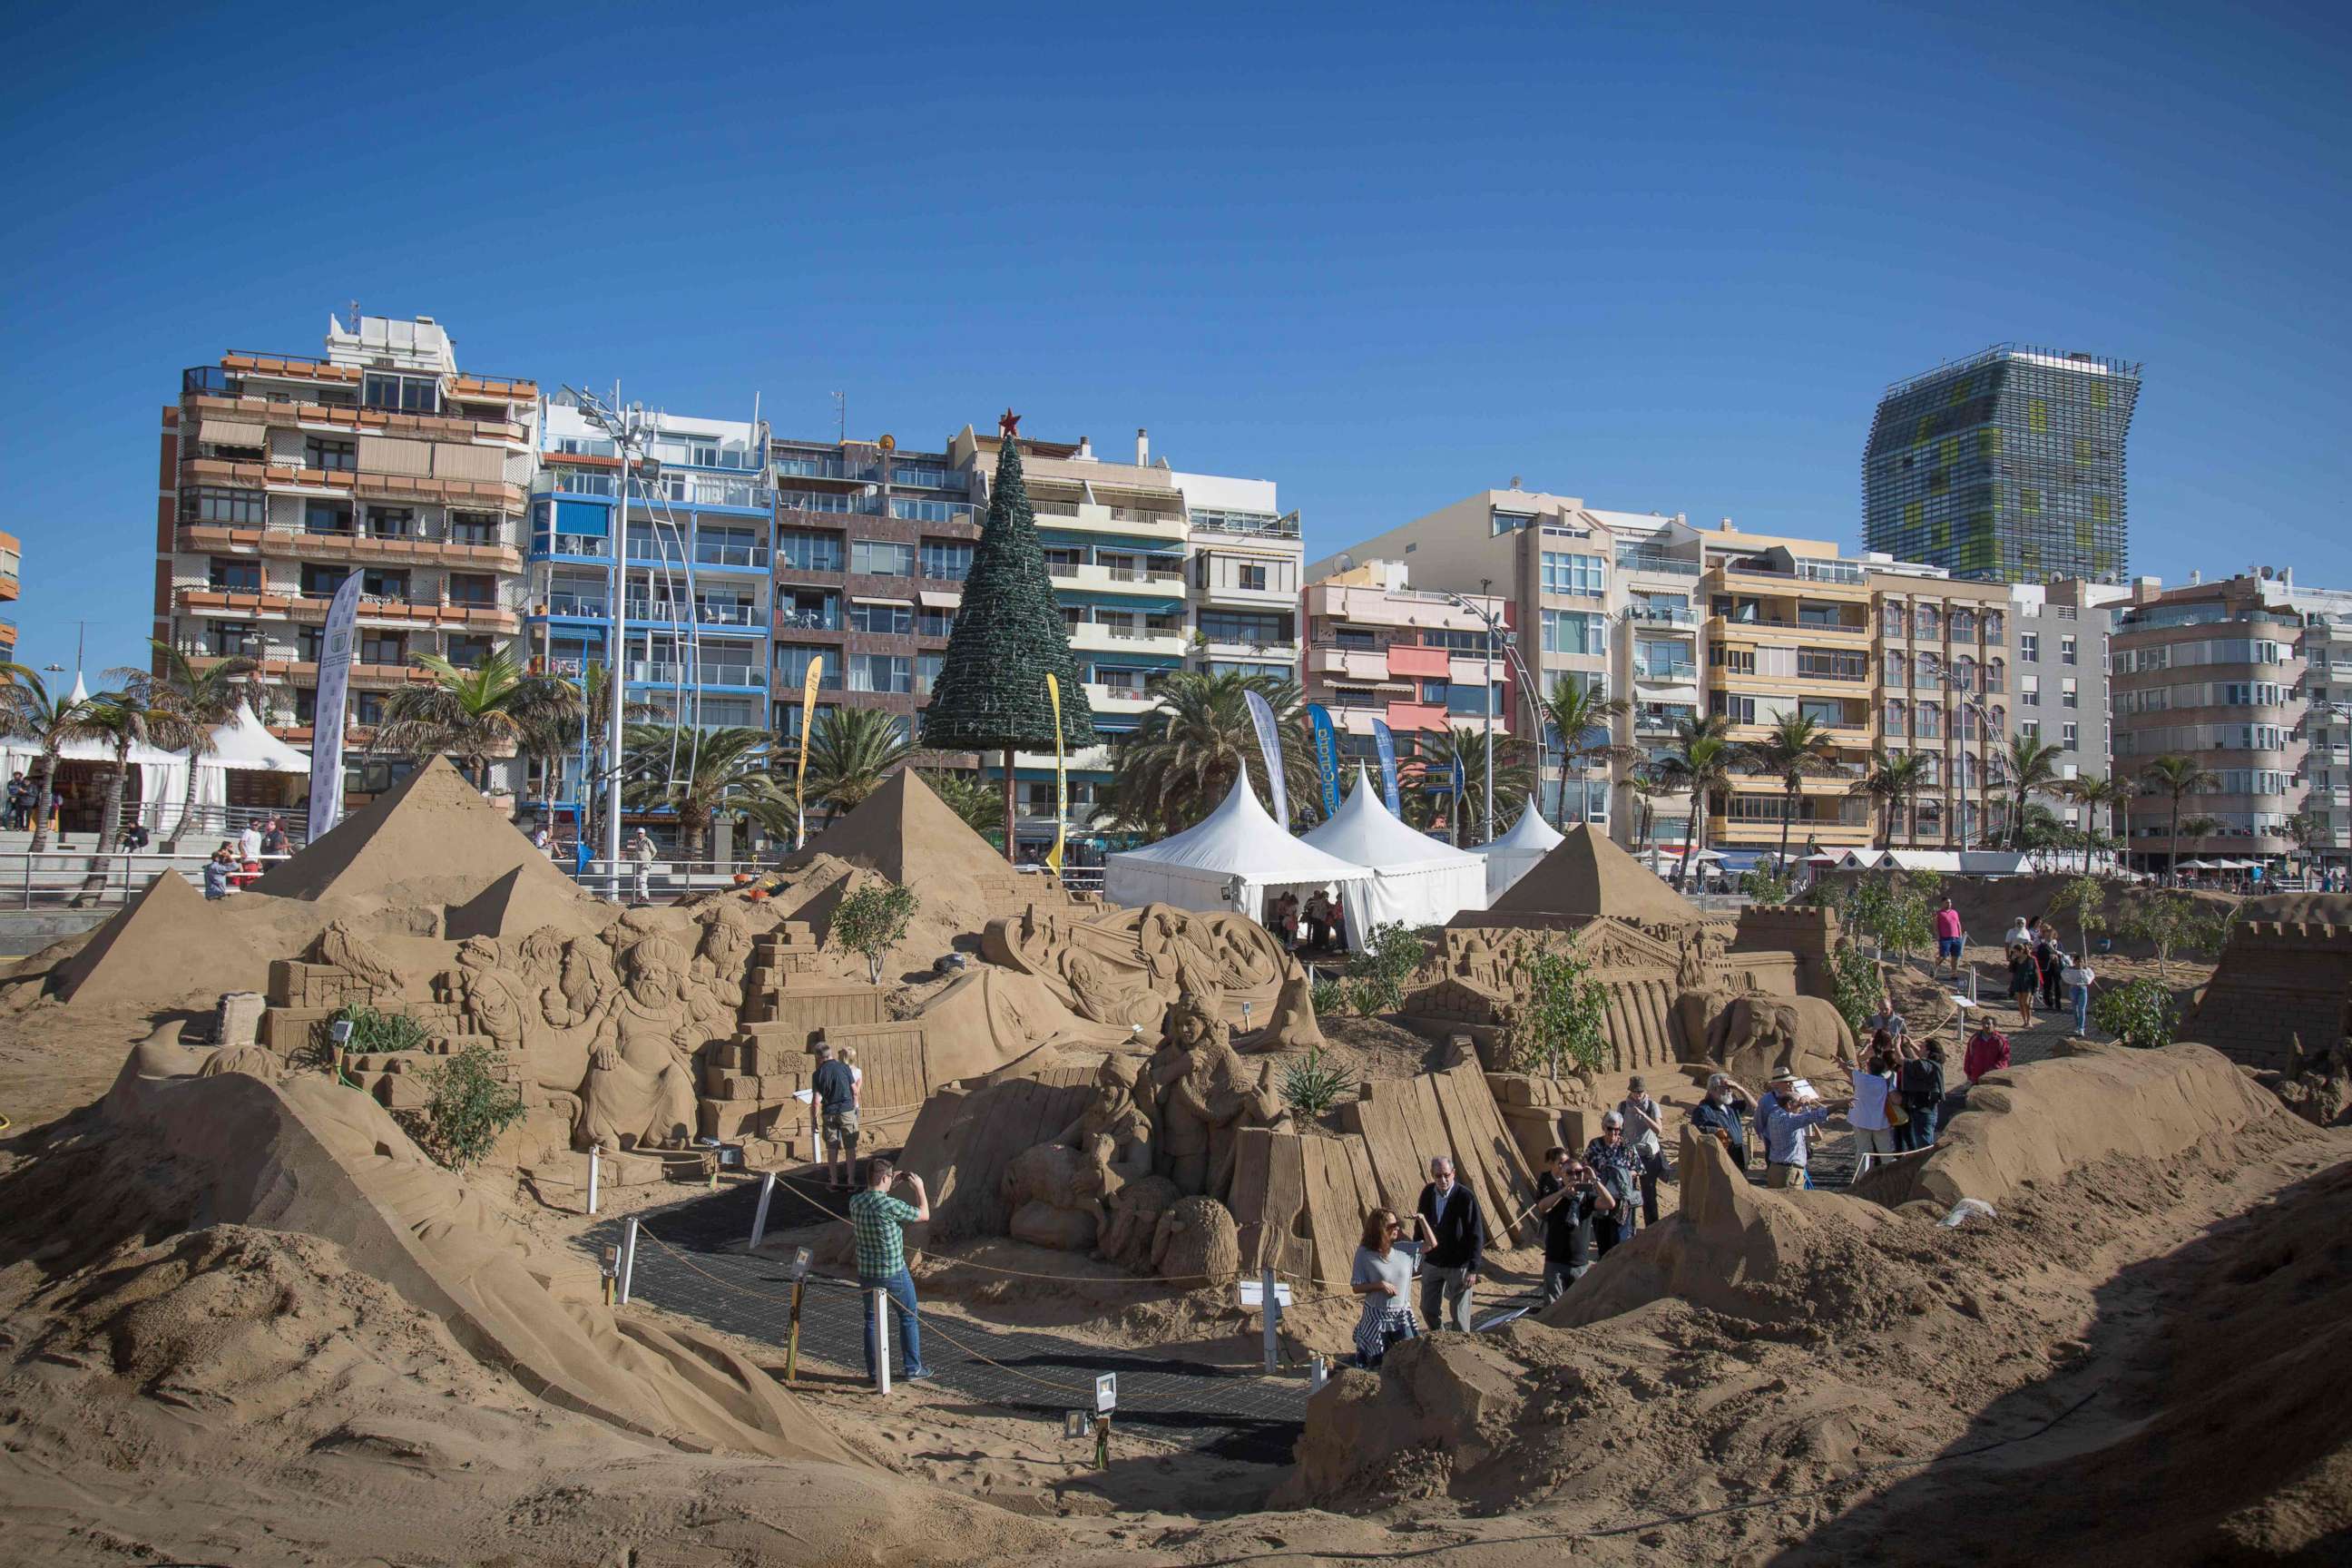 PHOTO: People visit sand sculptures depicting Christmas nativity scenes on the international beach resort of Las Canteras in Las Palmas de Gran Canaria on the Spanish Canary island of Gran Canaria on Dec. 7, 2017. 
